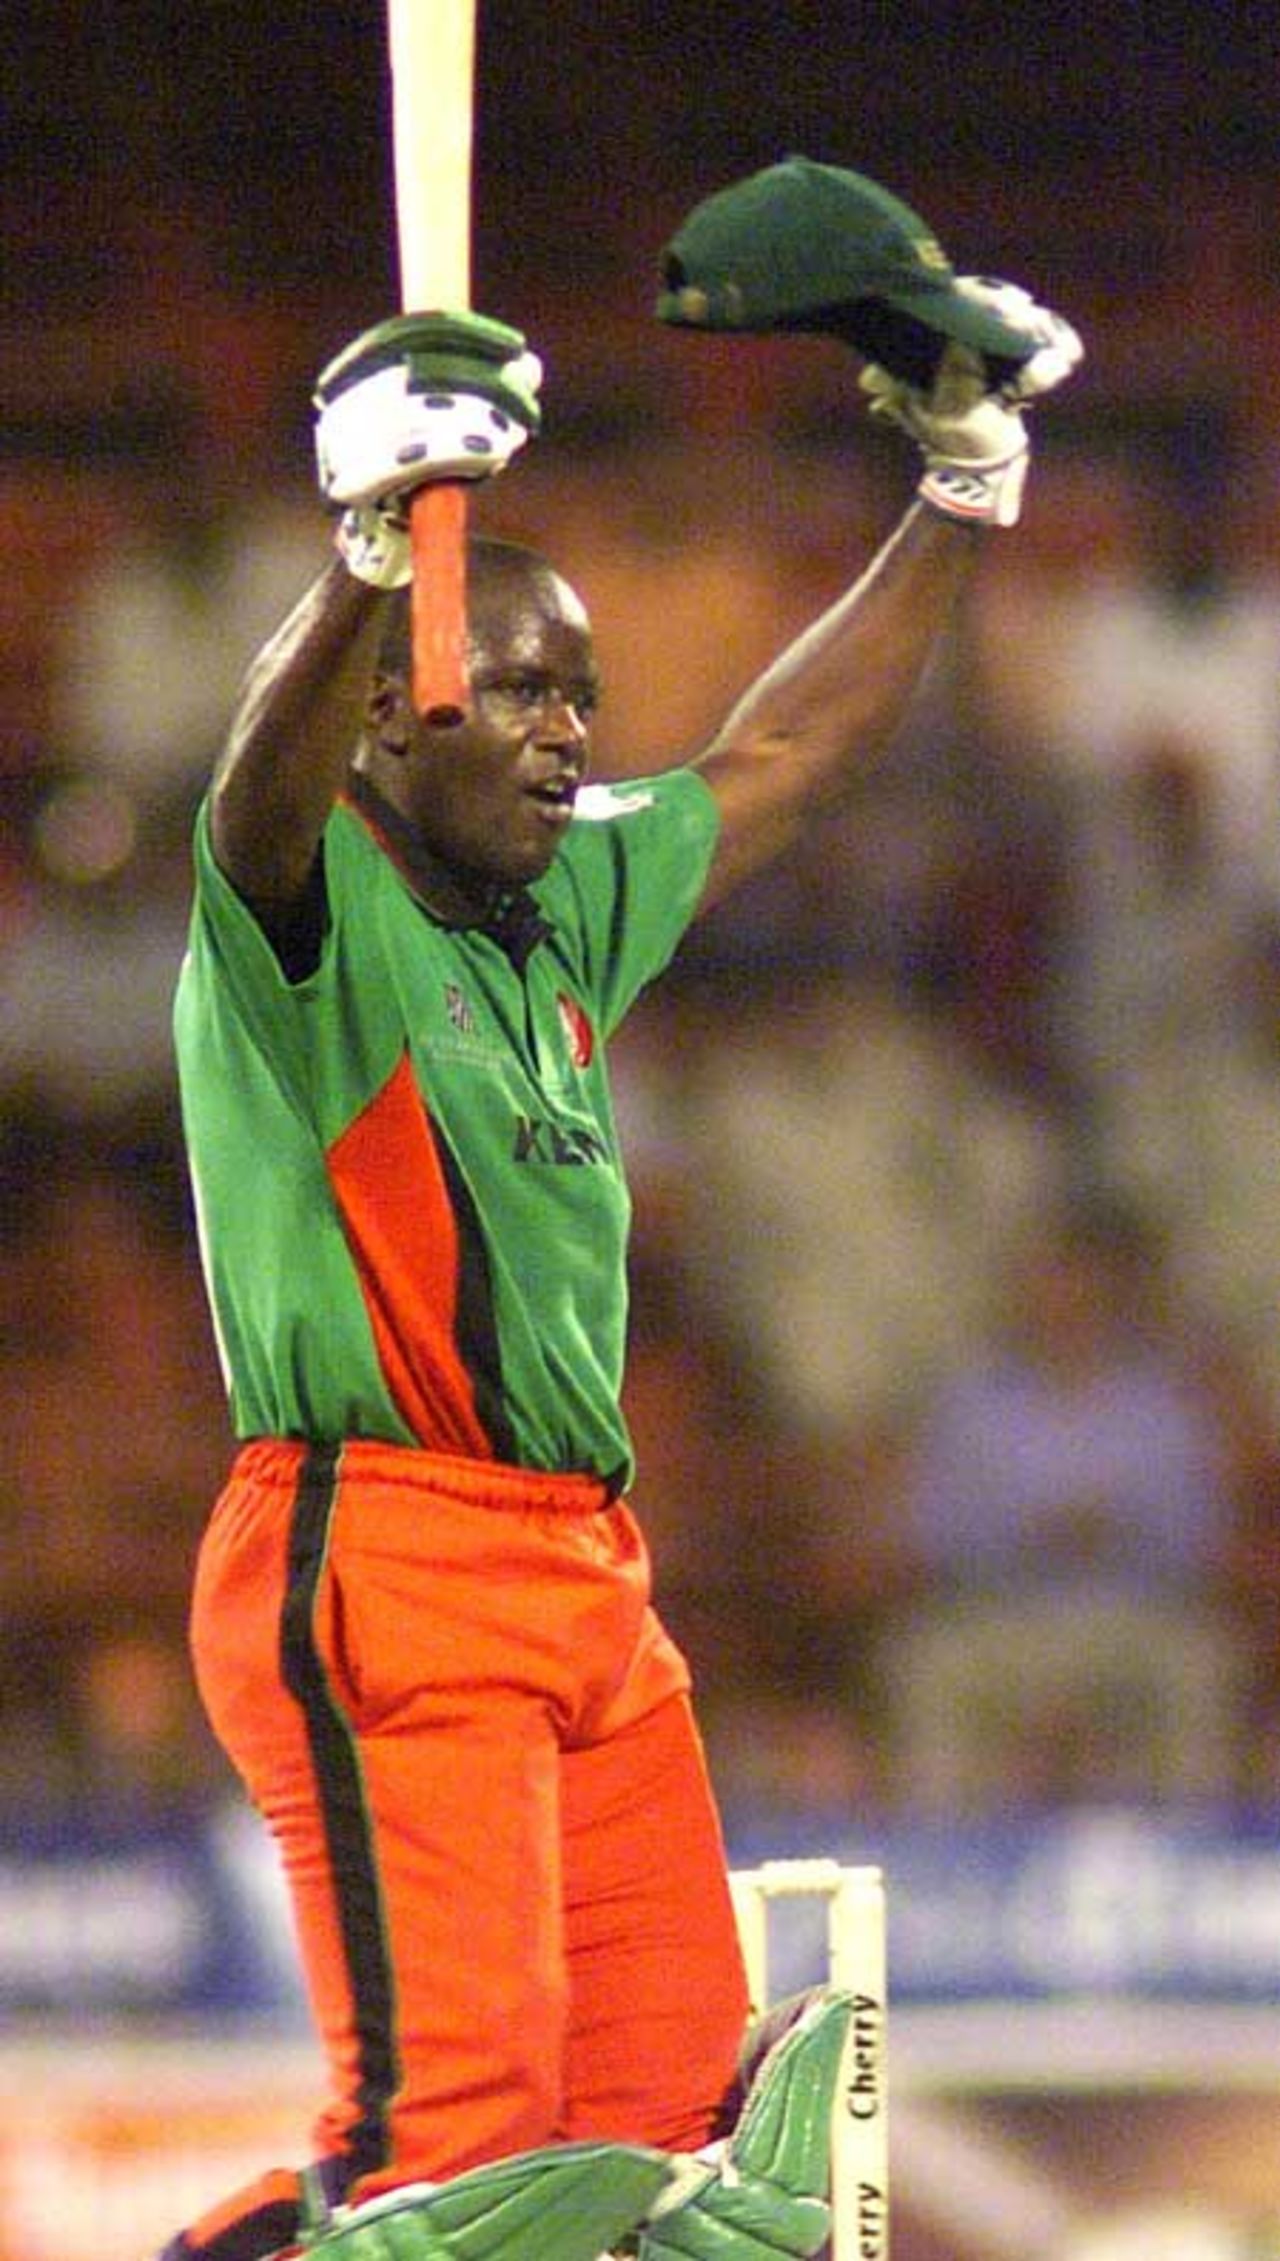 Odumbe acknowledging the crowds applause on his fifty, 6th Match: Kenya v Pakistan, Cherry Blossom Sharjah Cup, 8 Apr 2003